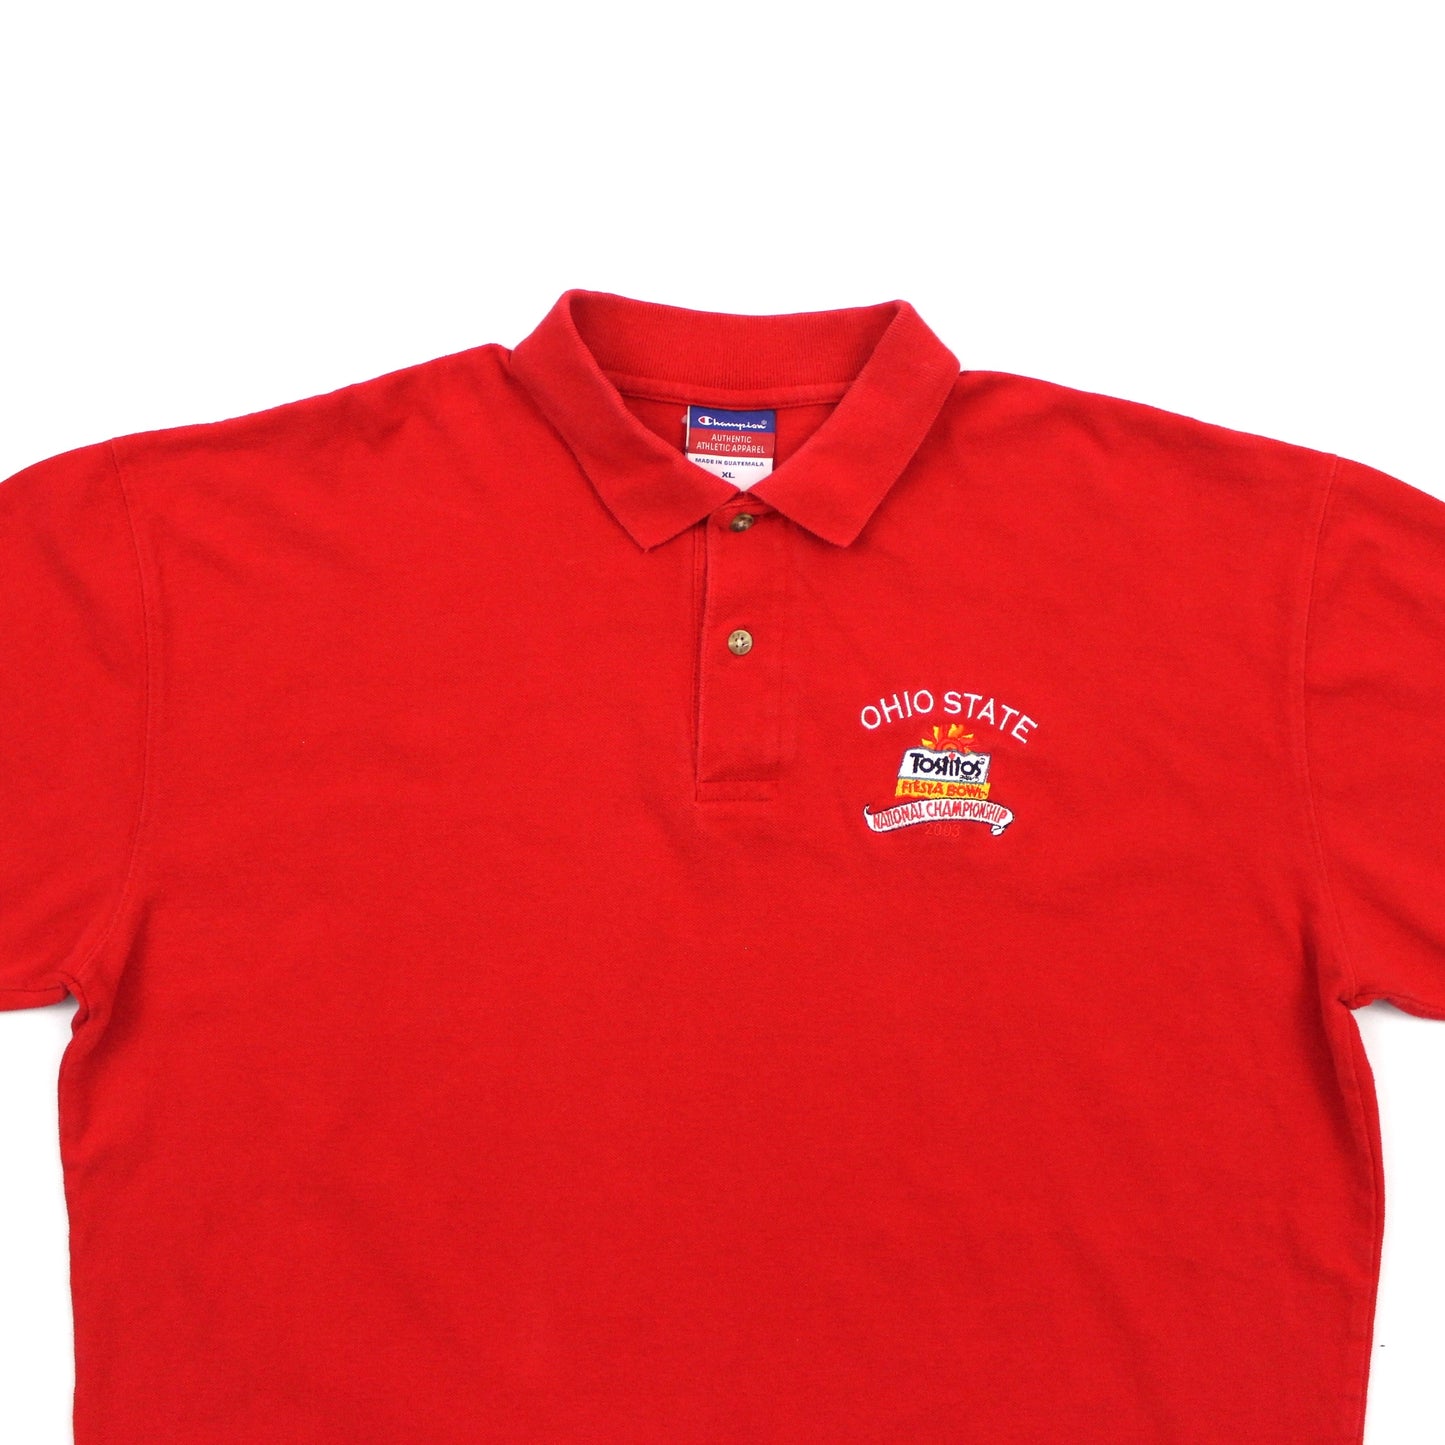 2003 Champion Red Polo Shirt, Ohio State Tostito’s Fiesta Bowl (XL)